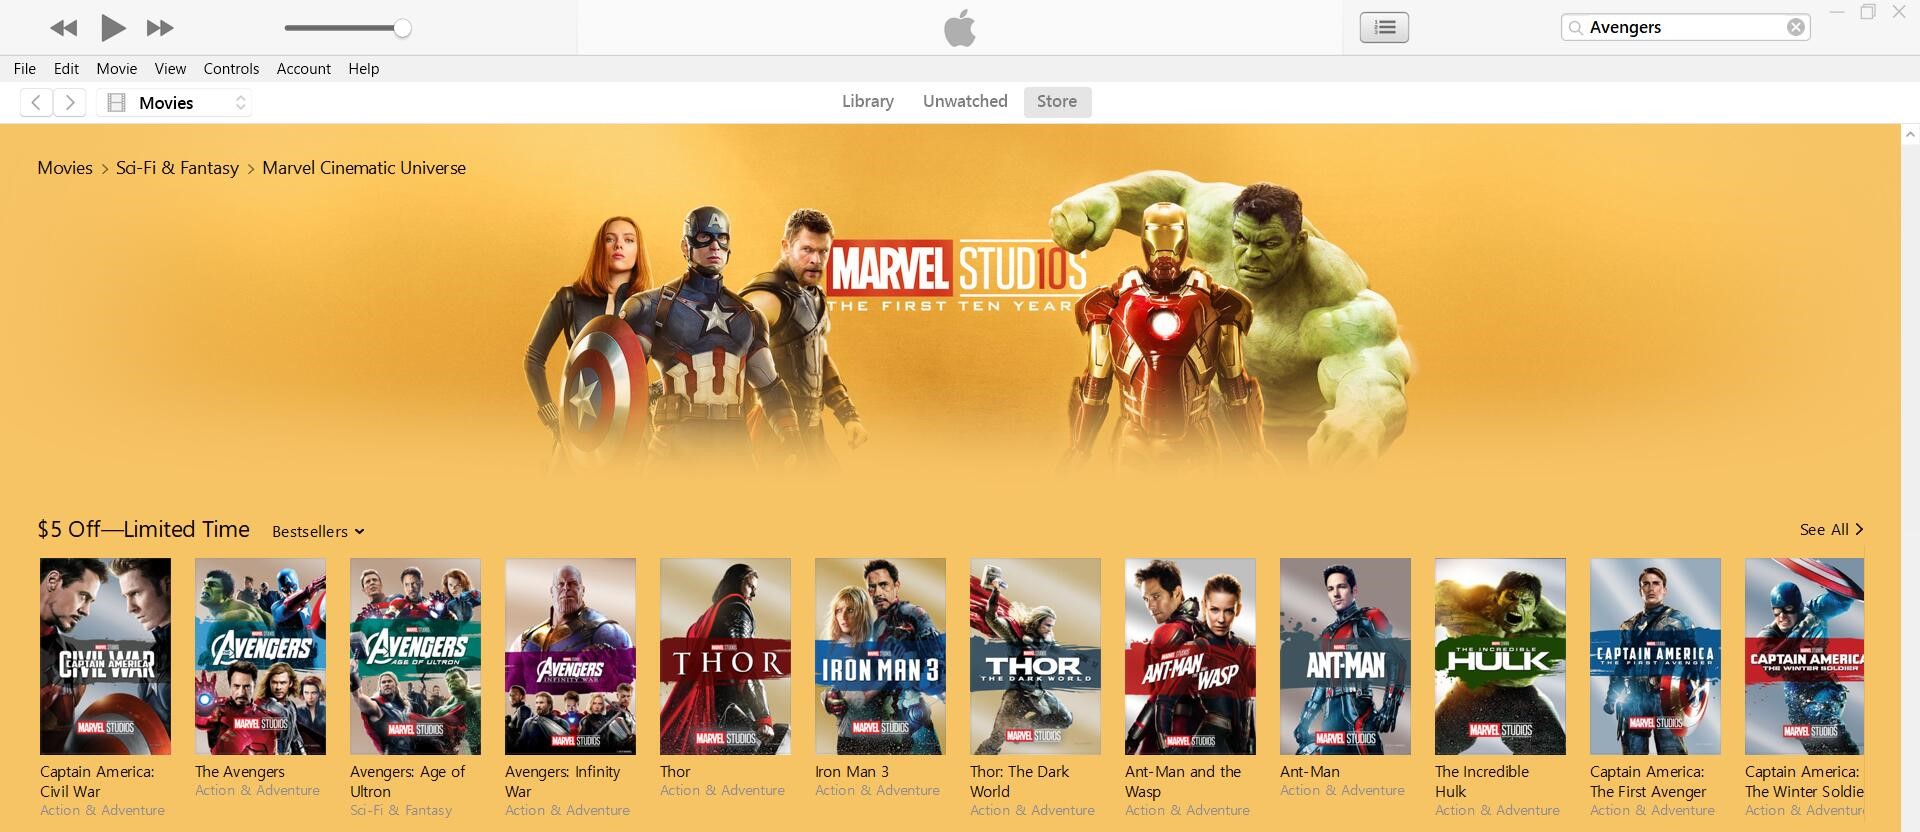 Watch the Avengers Movies on iTunes